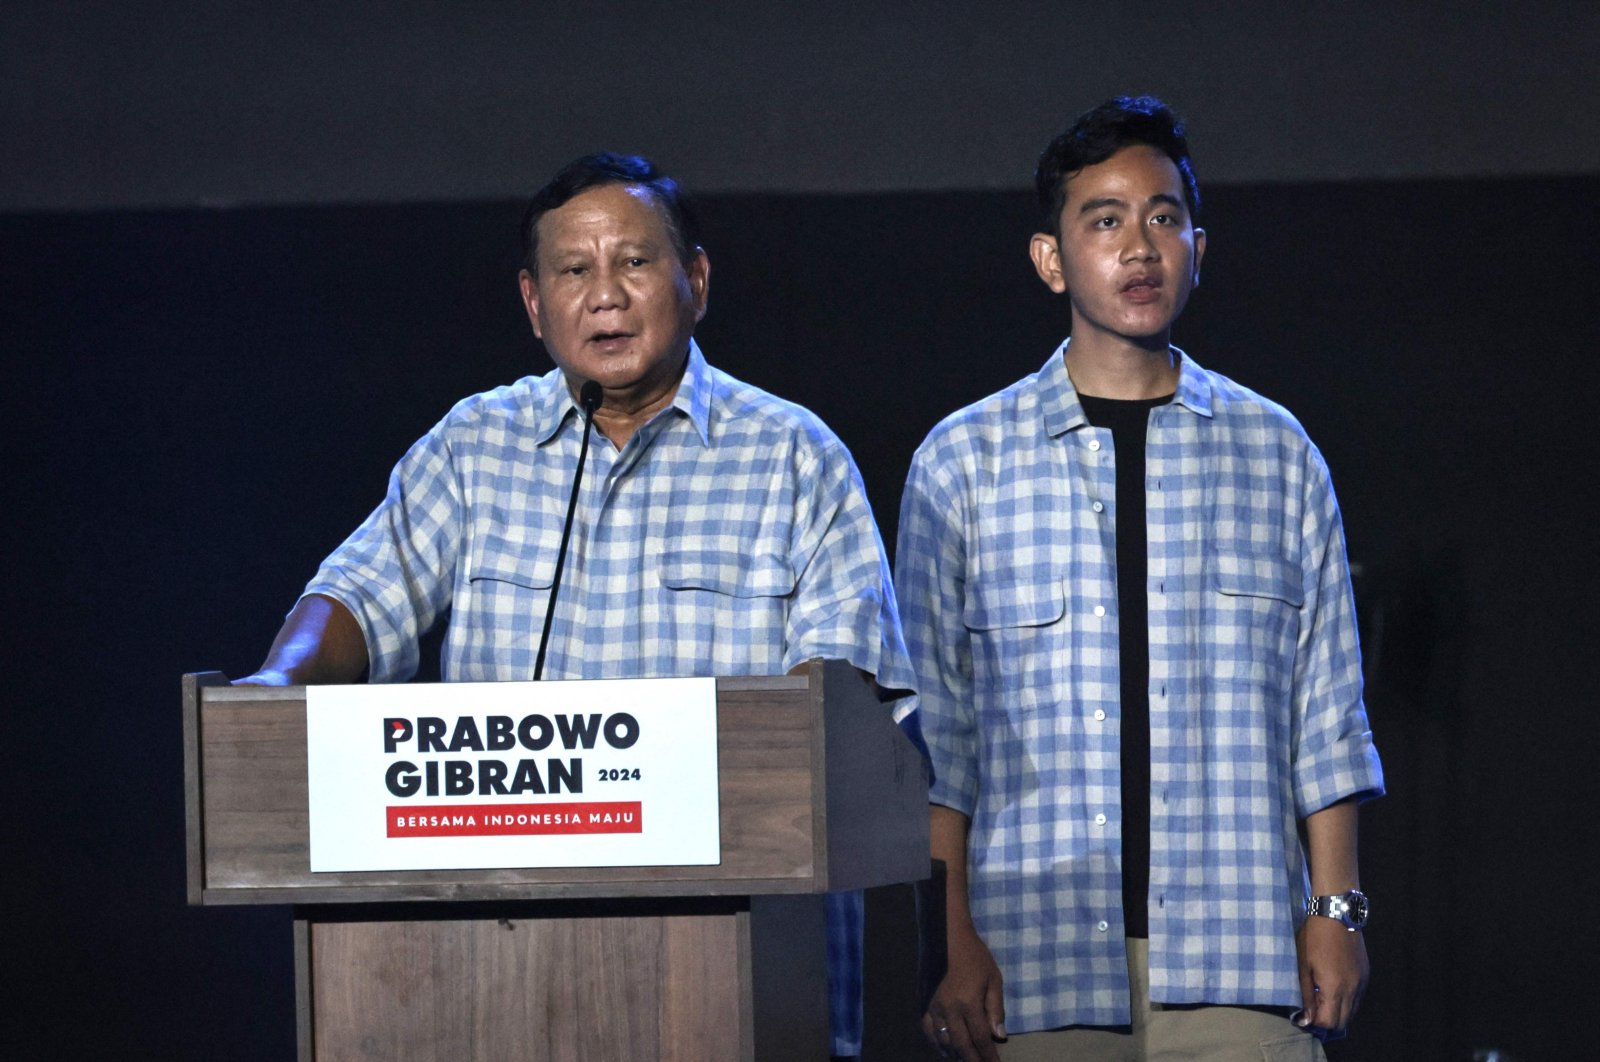 Prabowo wins Indonesia’s presidential poll with 58% of vote